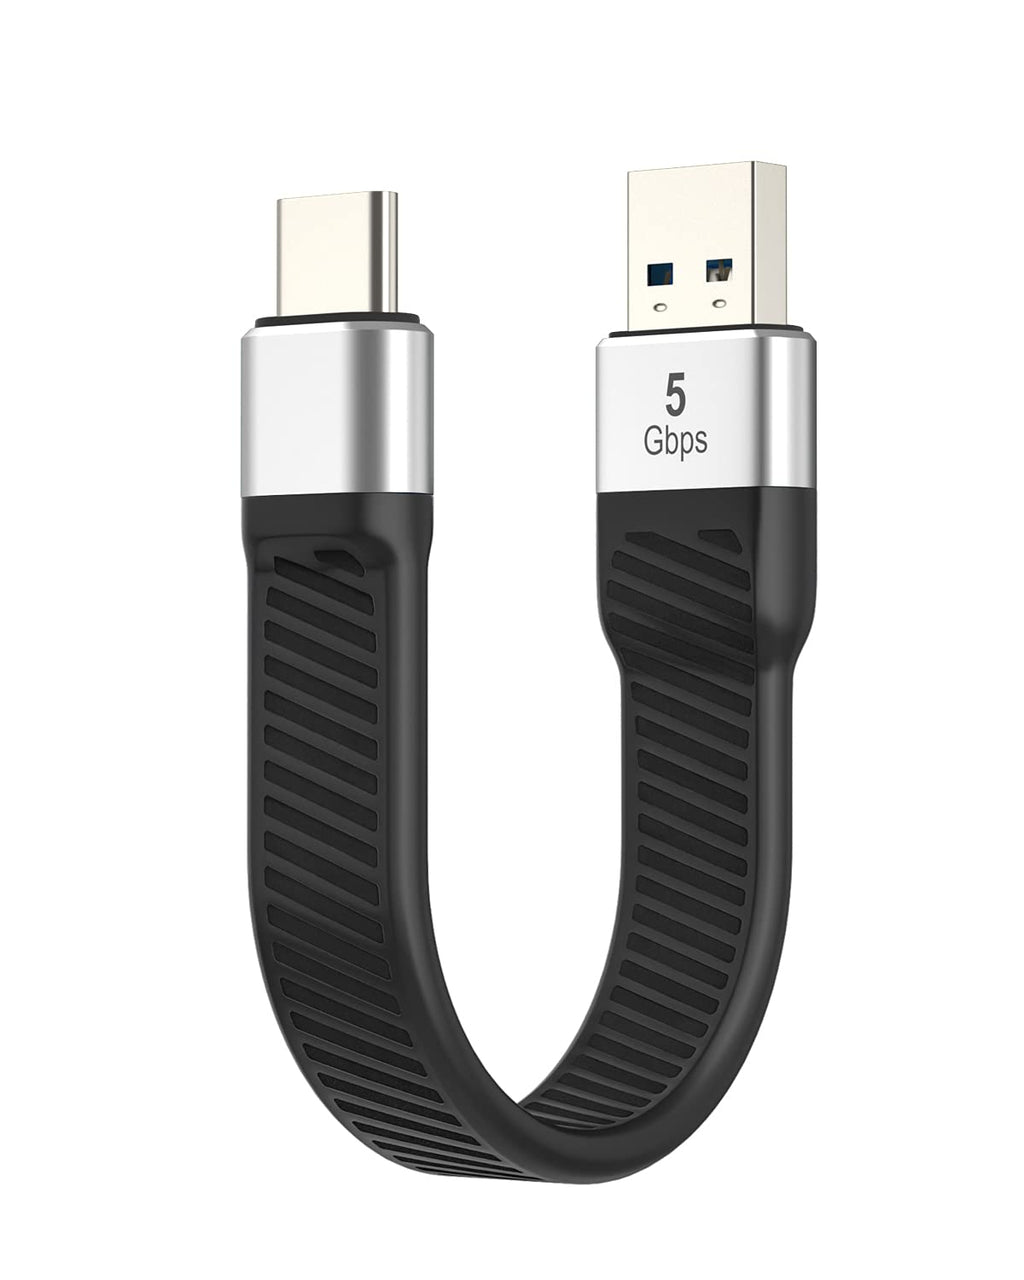 [Australia - AusPower] - Short USB Type C Cable, LamToon 5Gbps Data Sync 3A USB to USB C Fast/Quick Charge Cable 3.1 Gen 1 Type C Unique FPC Flat Design for Samsung Galaxy S10+ S9, Note 9 8, LG V20, Google Pixel, Power Bank Silver 